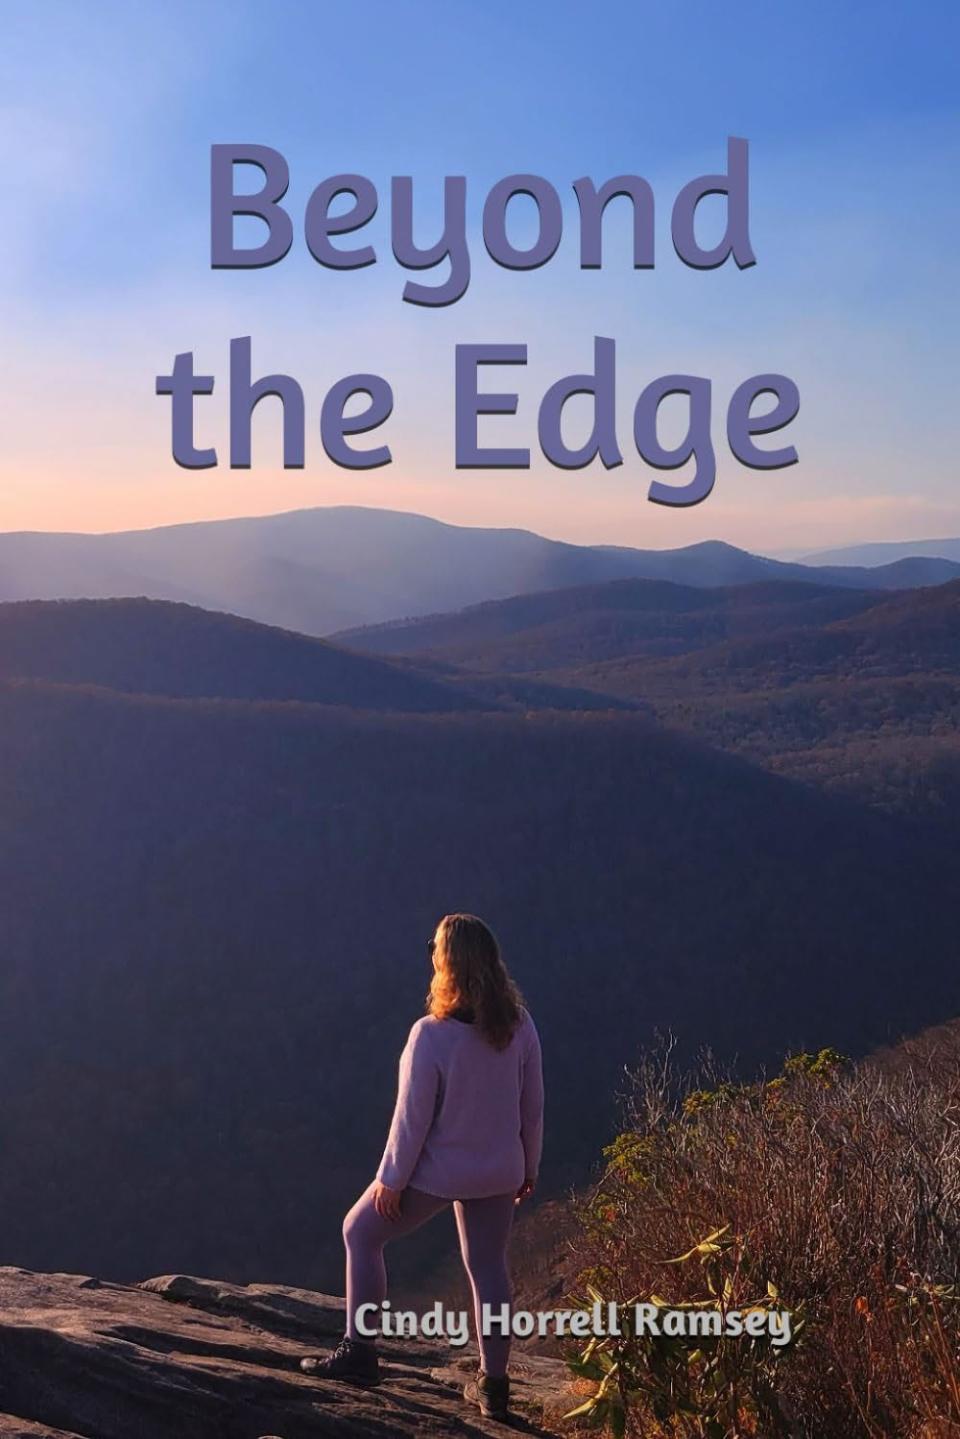 Cindy Horrell Ramsey's new novel is "Beyond the Edge."